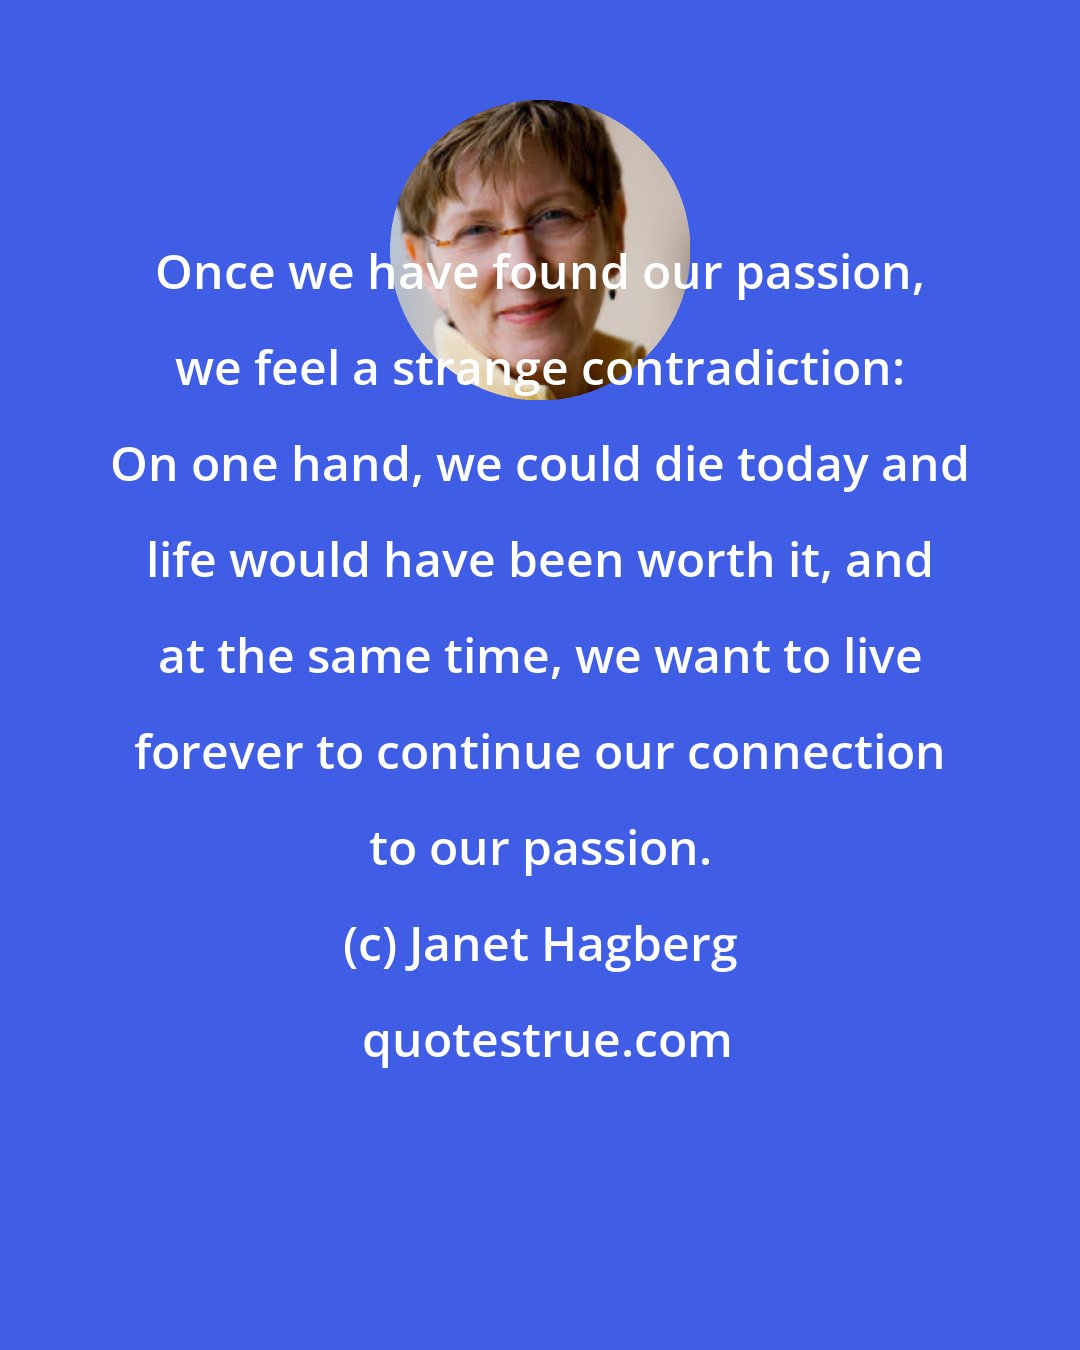 Janet Hagberg: Once we have found our passion, we feel a strange contradiction: On one hand, we could die today and life would have been worth it, and at the same time, we want to live forever to continue our connection to our passion.